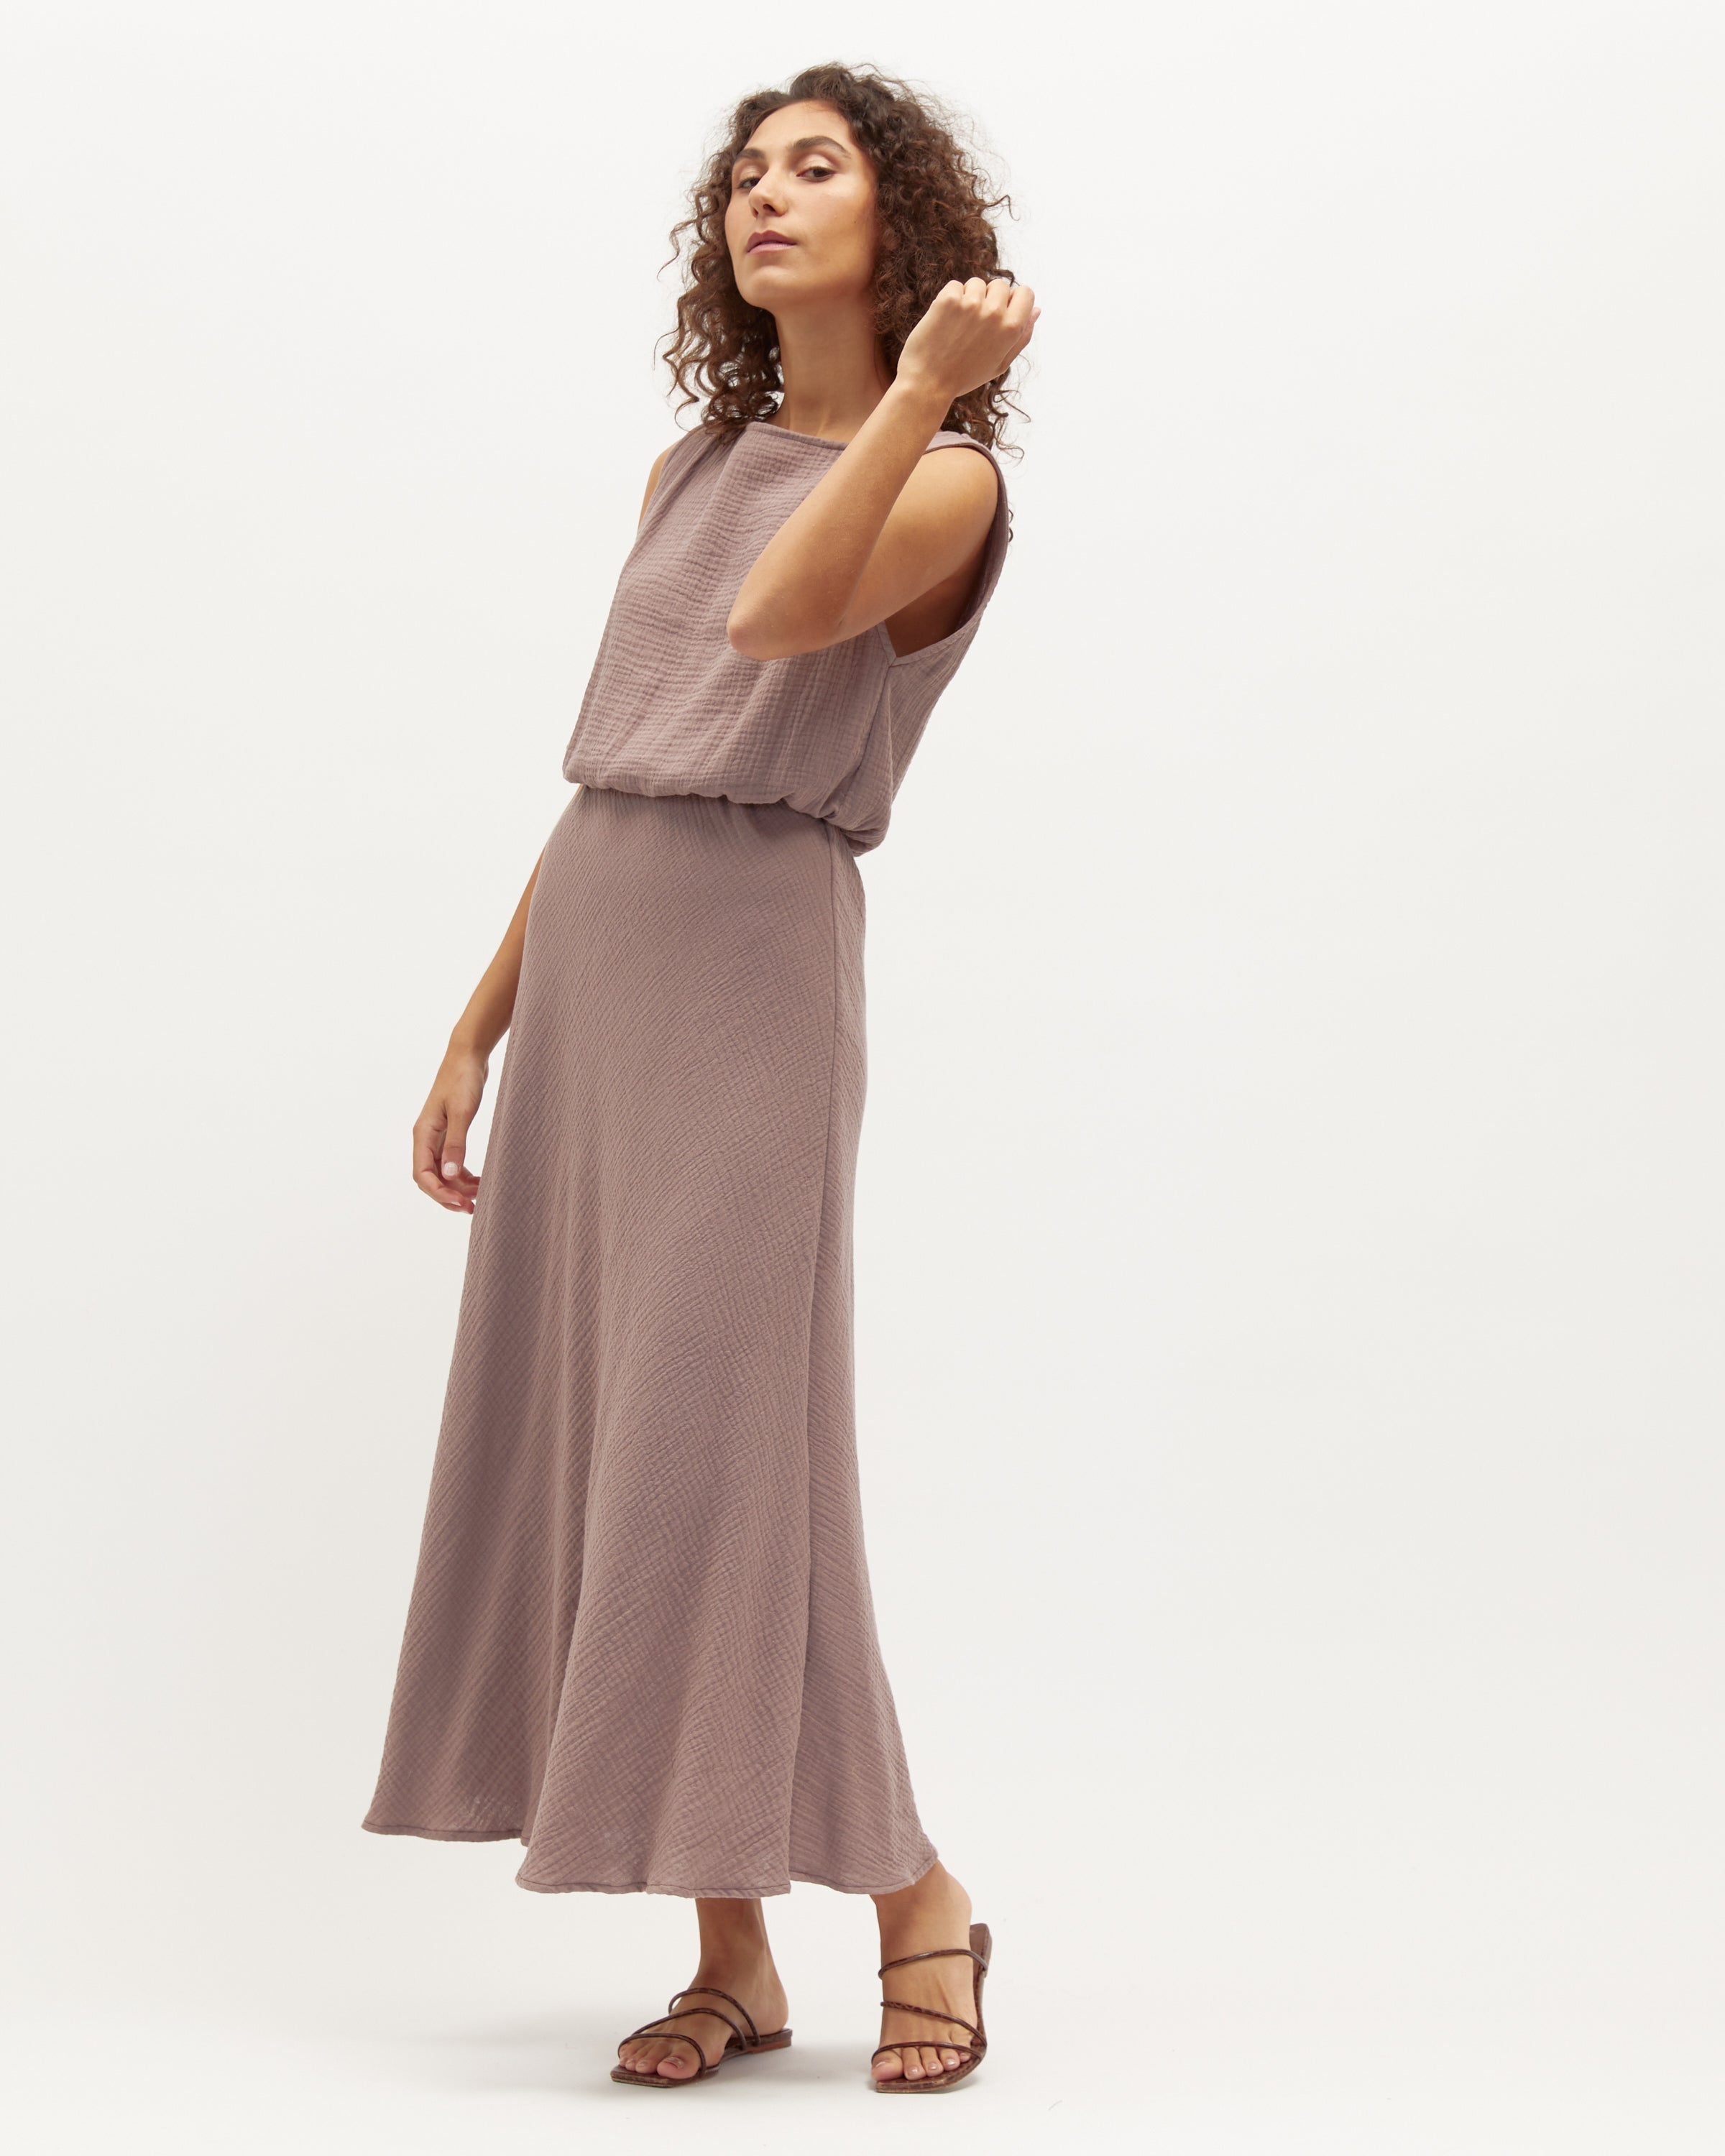 Wray Dress | Taupe $269